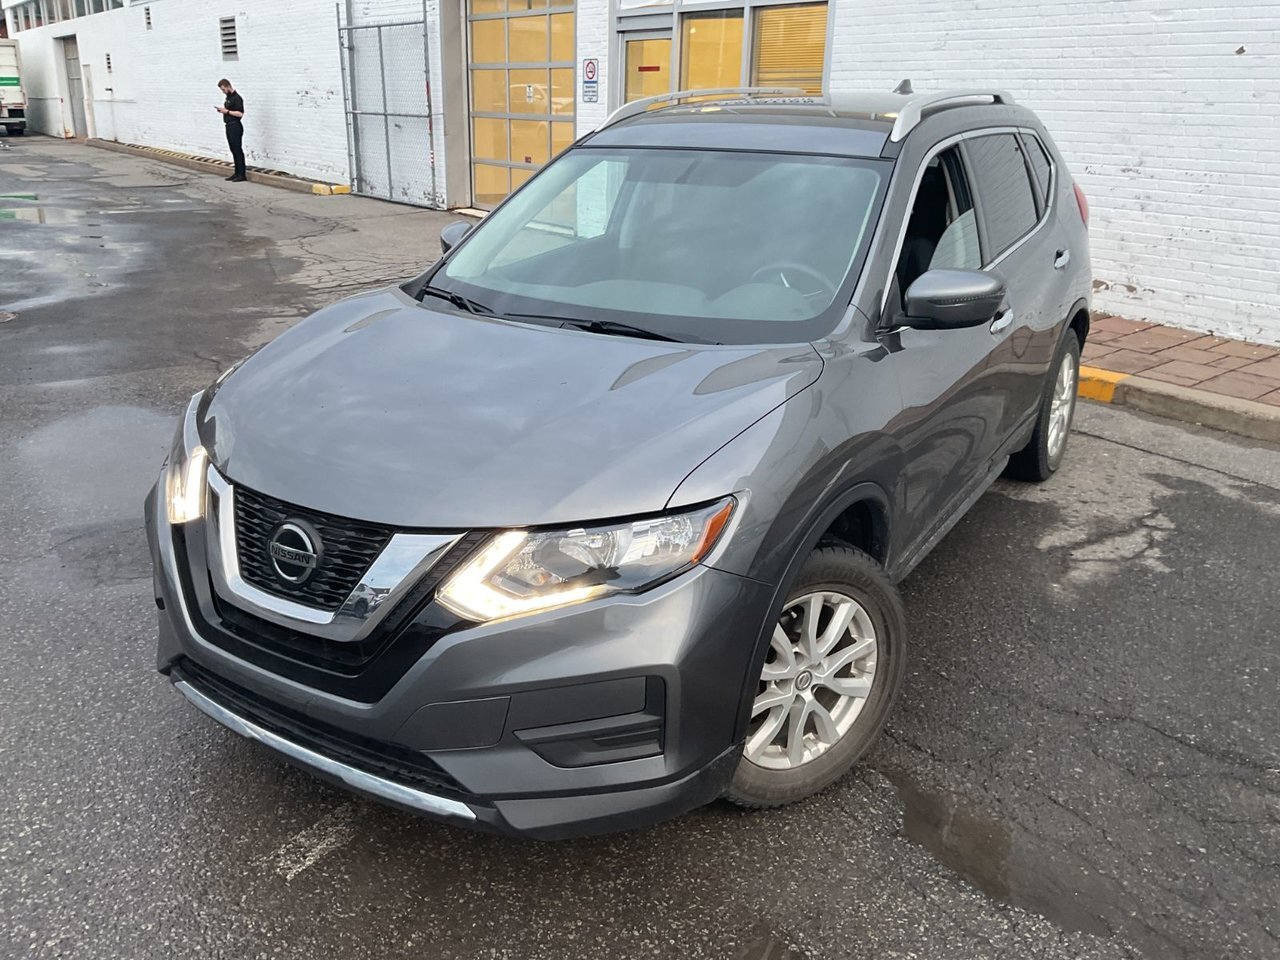 2019 Nissan Rogue S SPECIAL EDITION